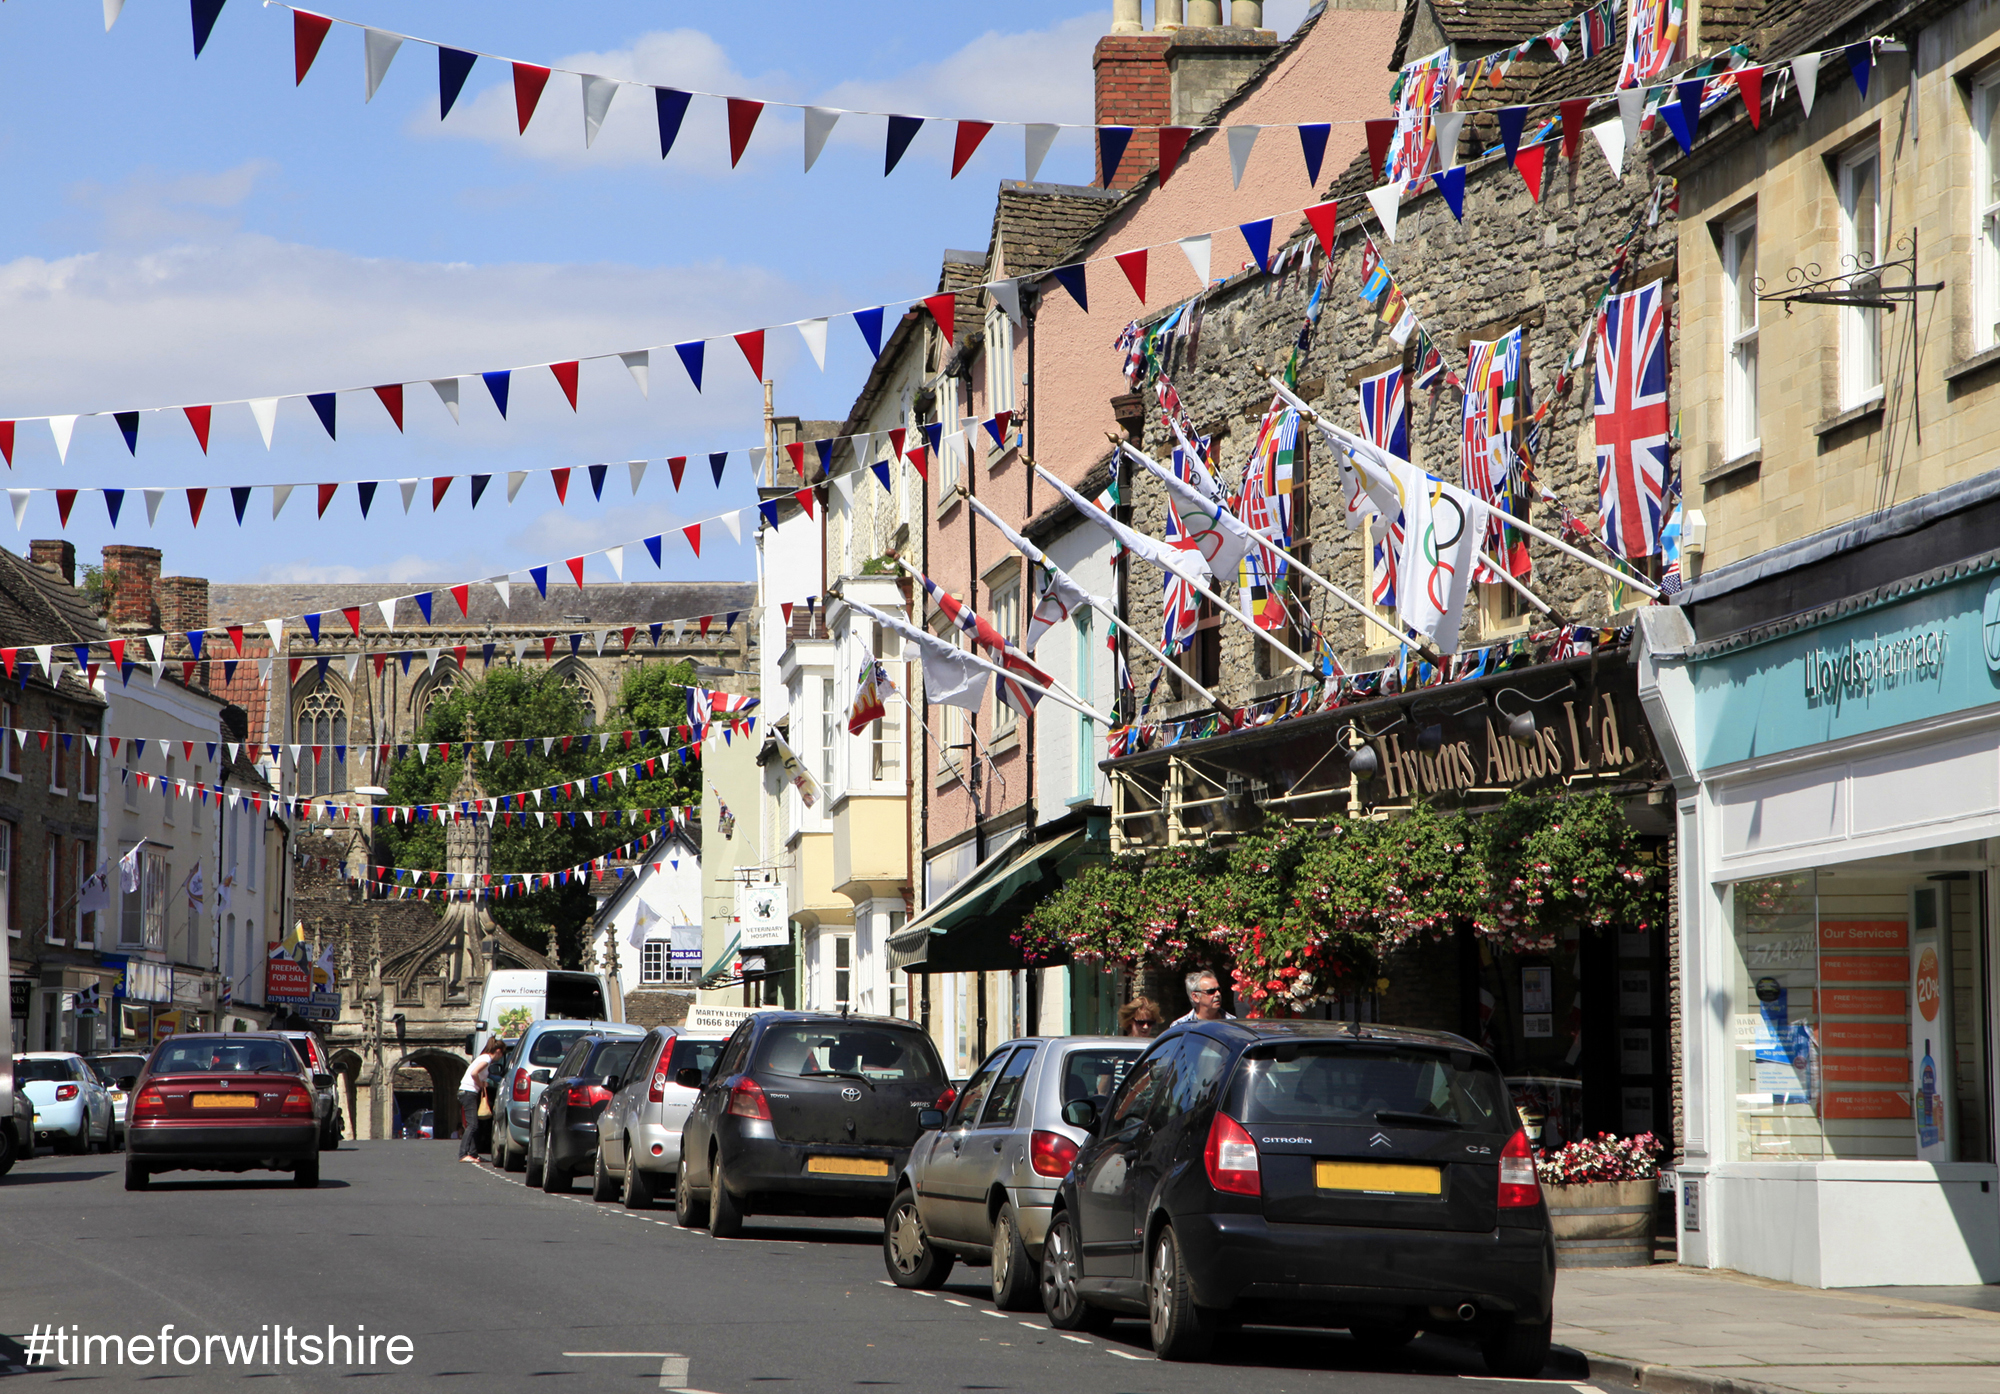 Shopping street with bunting flying Malmesbury © www.visitwiltshire.co.uk